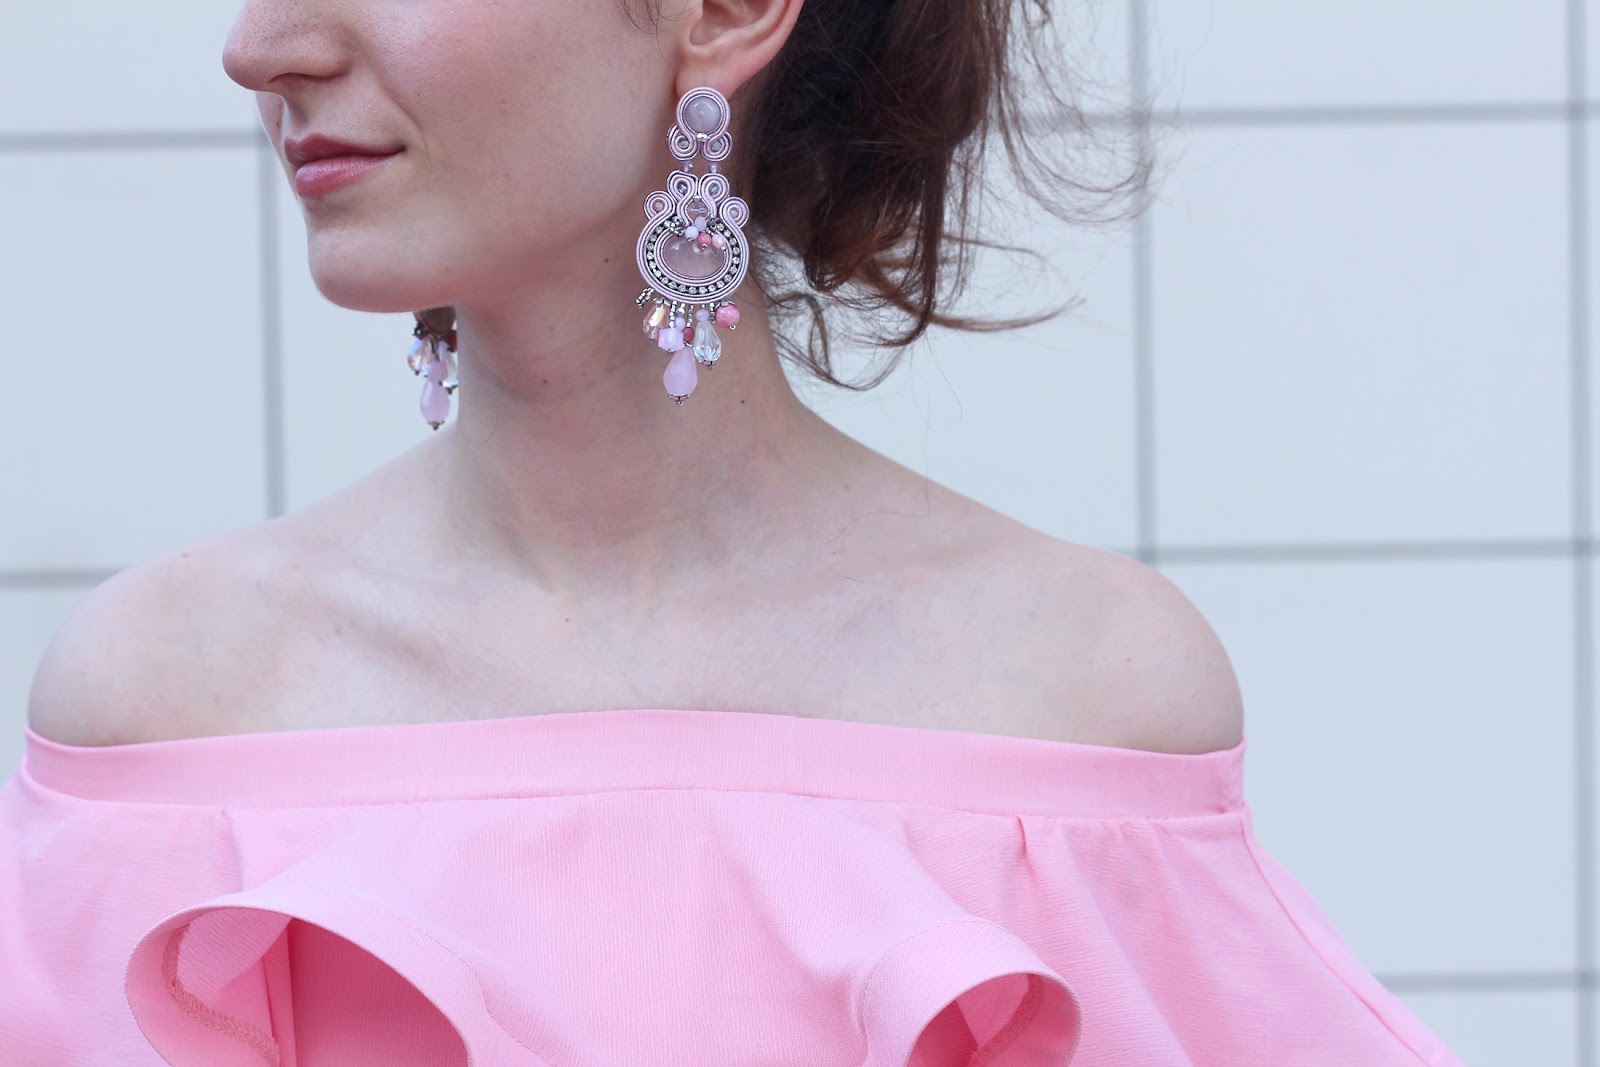 fashion style blogger outfit ootd italian girl italy trend vogue glamour pescara pink volant ruffles ruches off-shoulder dress top chicwish dress link bow heels shoes décolleté axels laboratory soutache earring orecchini zara patatine potatos bag clutch pop